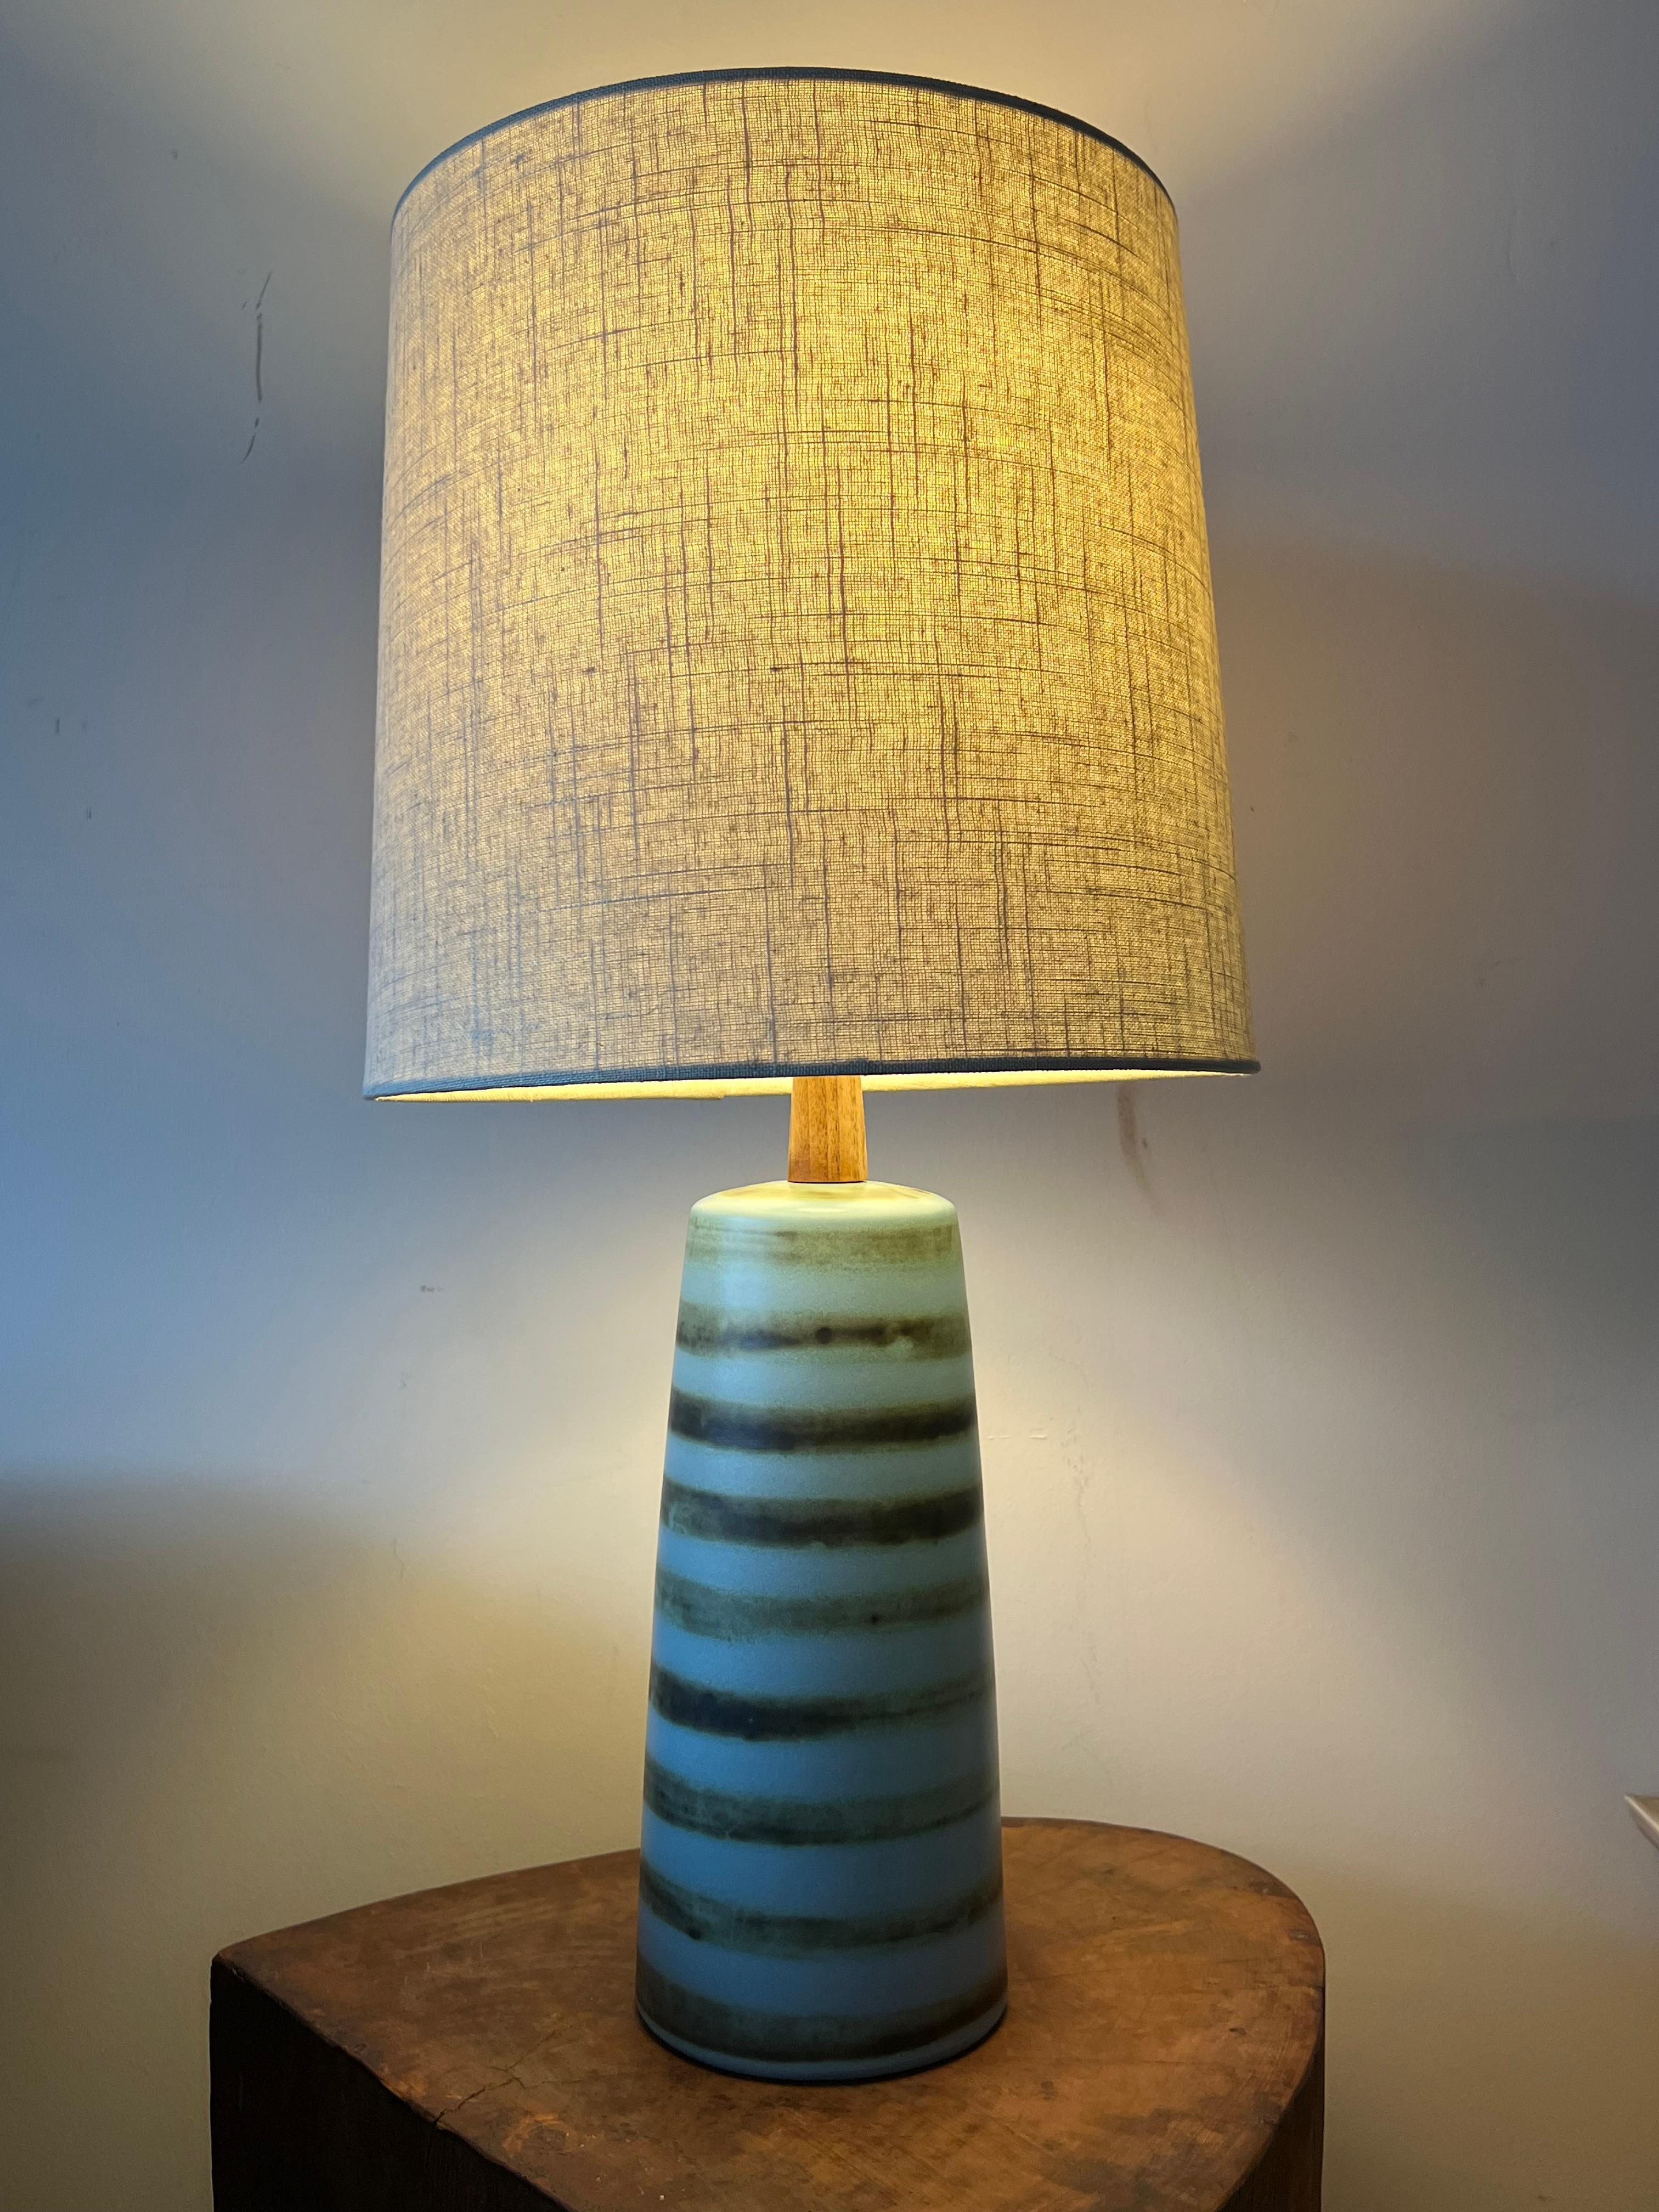 Beautiful table lamp designed by Jane and Gordon Martz for Marshall Studios. Features a flat glaze with brown striping over blue. Wonderful shape and color palette. 

Dimensions 
overall: 
25” tall 
5